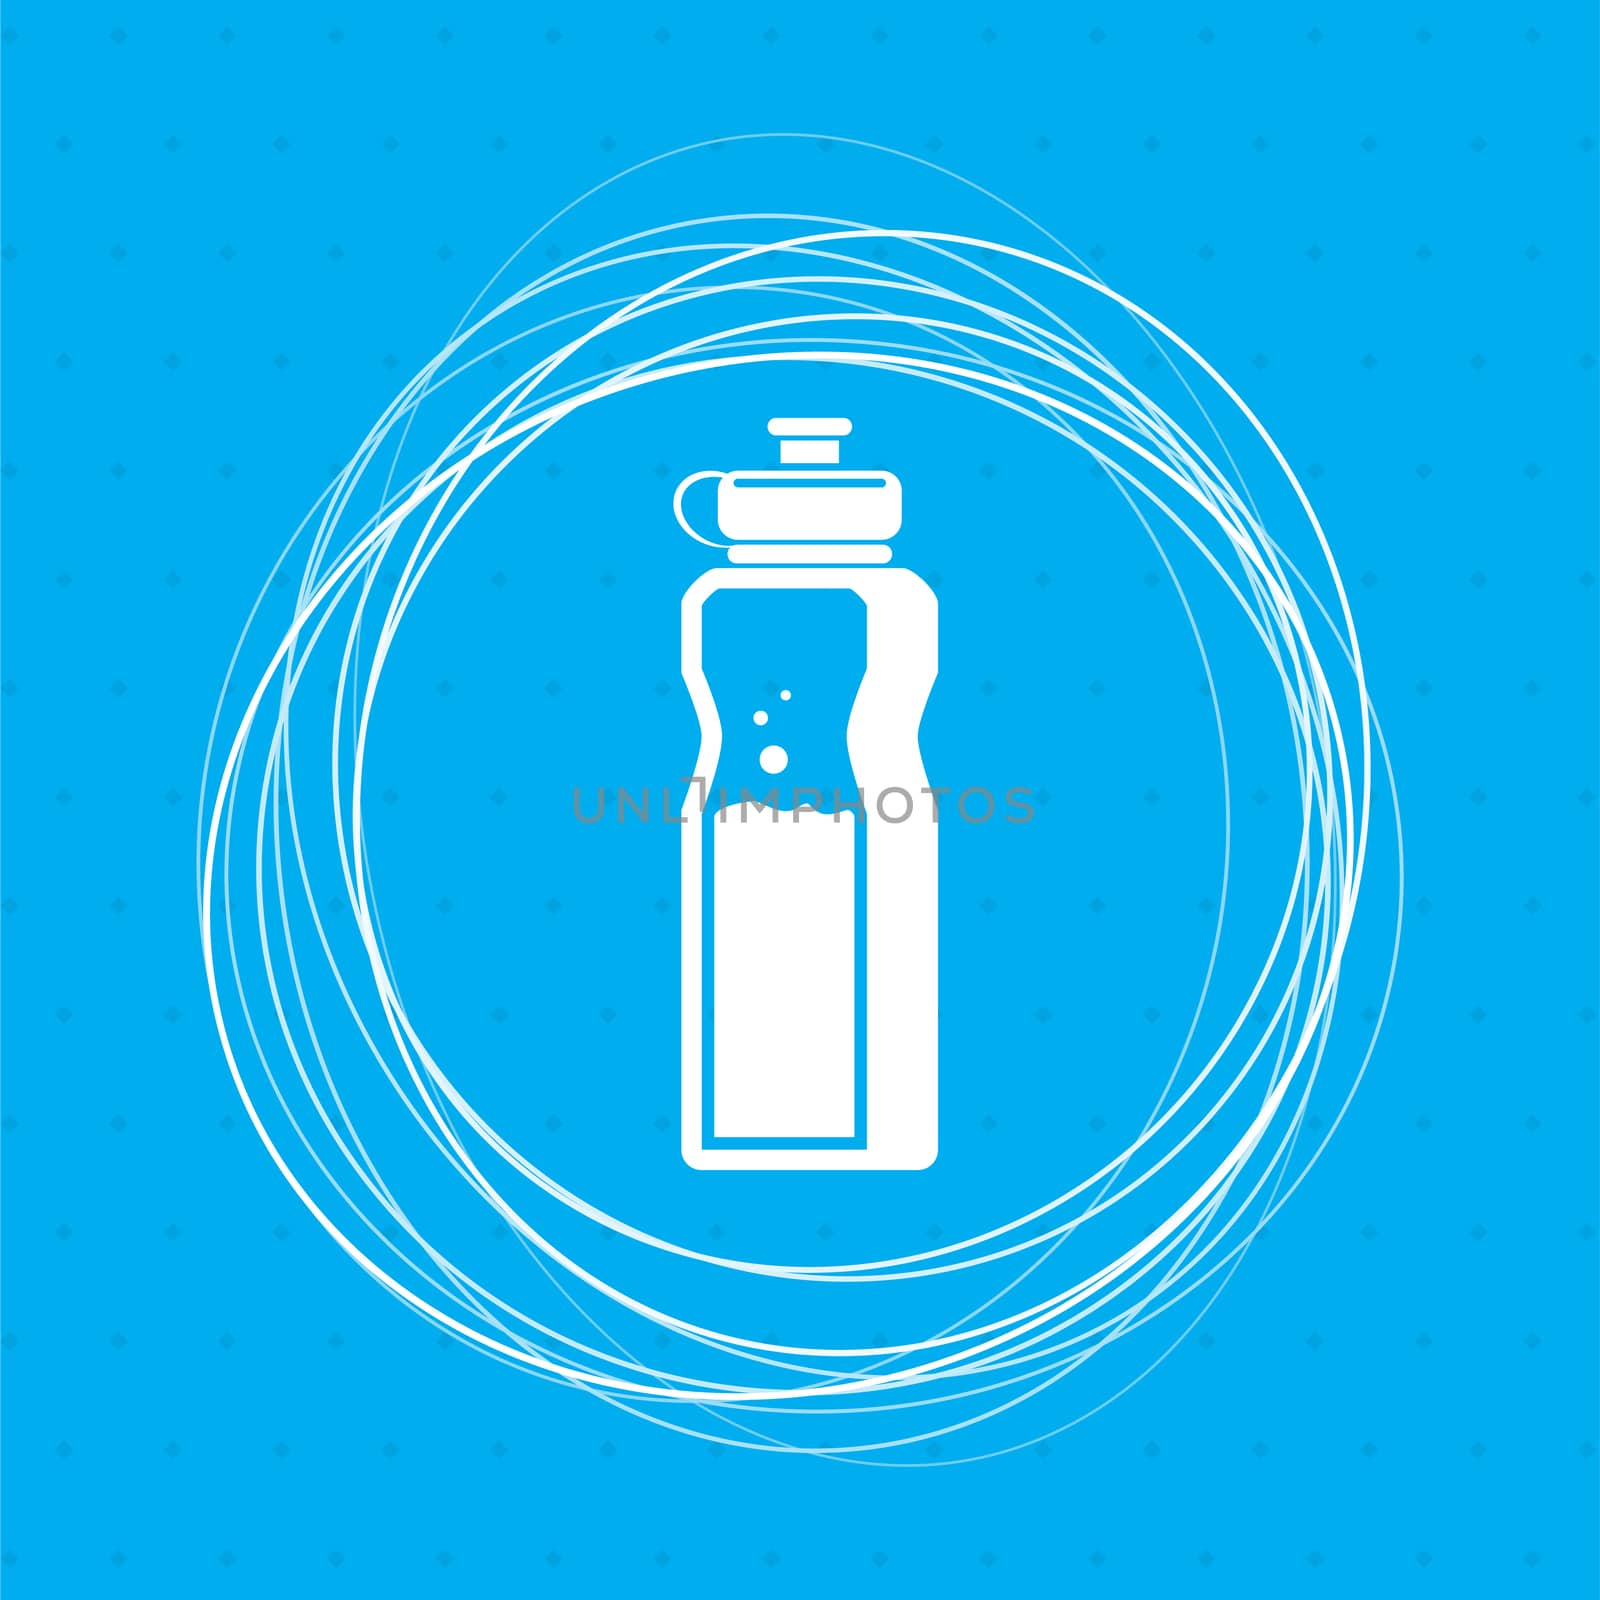 bottle of water icon on a blue background with abstract circles around and place for your text.  by Adamchuk